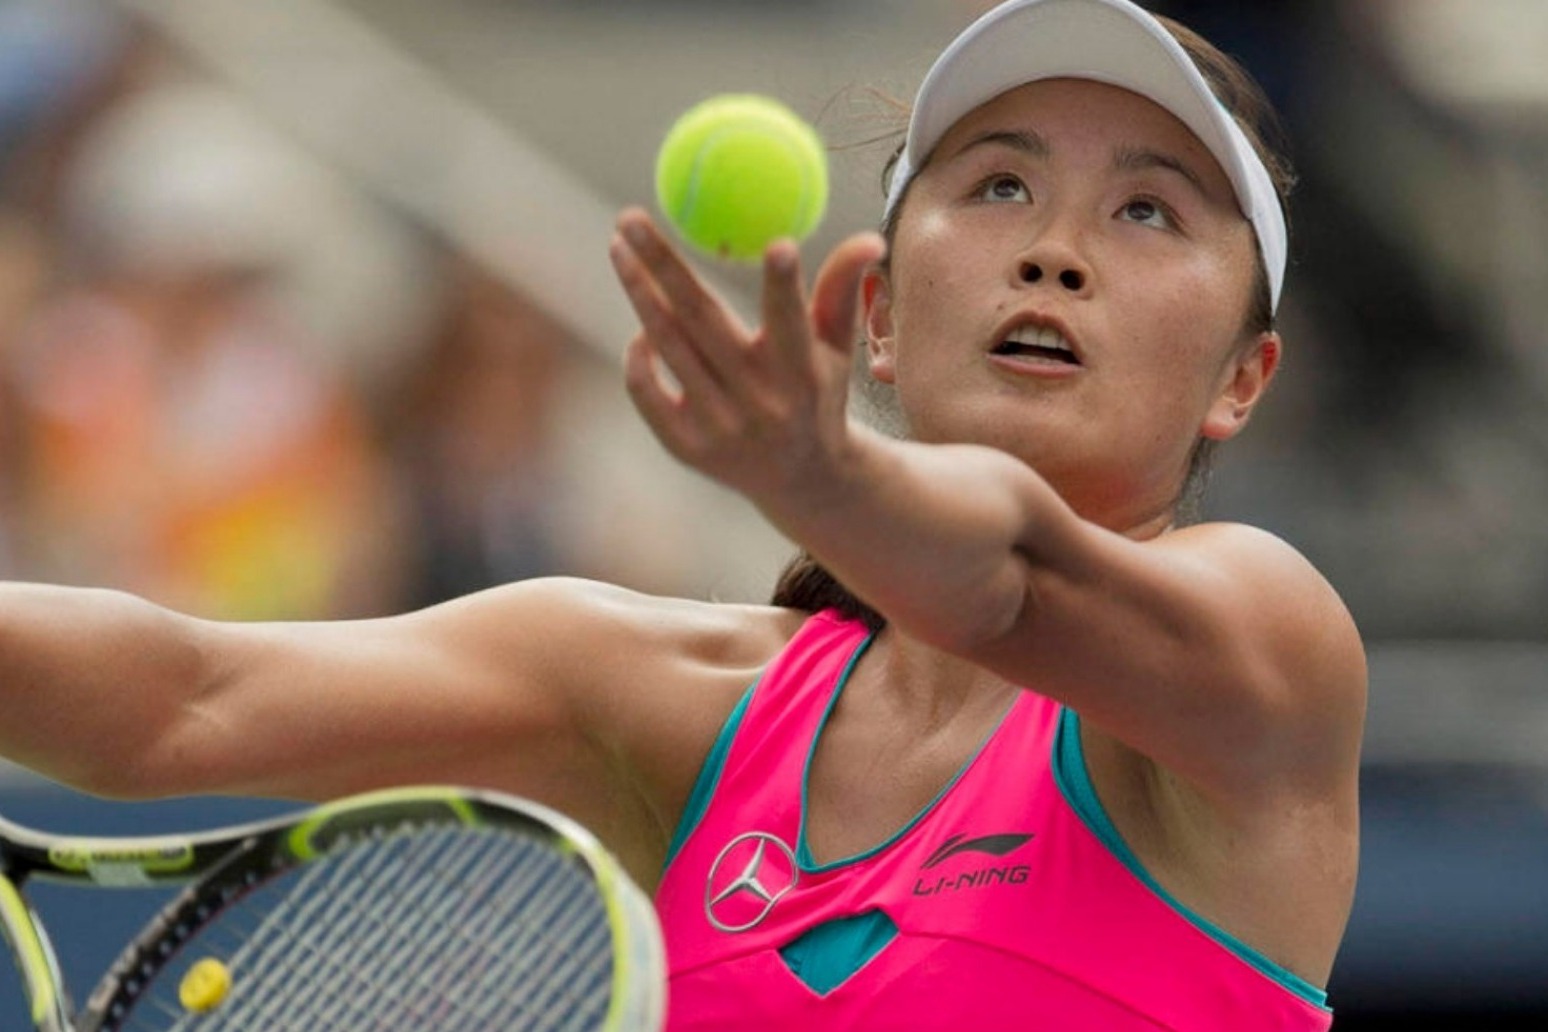 Government calls for ‘verifiable evidence’ that Chinese tennis player is safe 